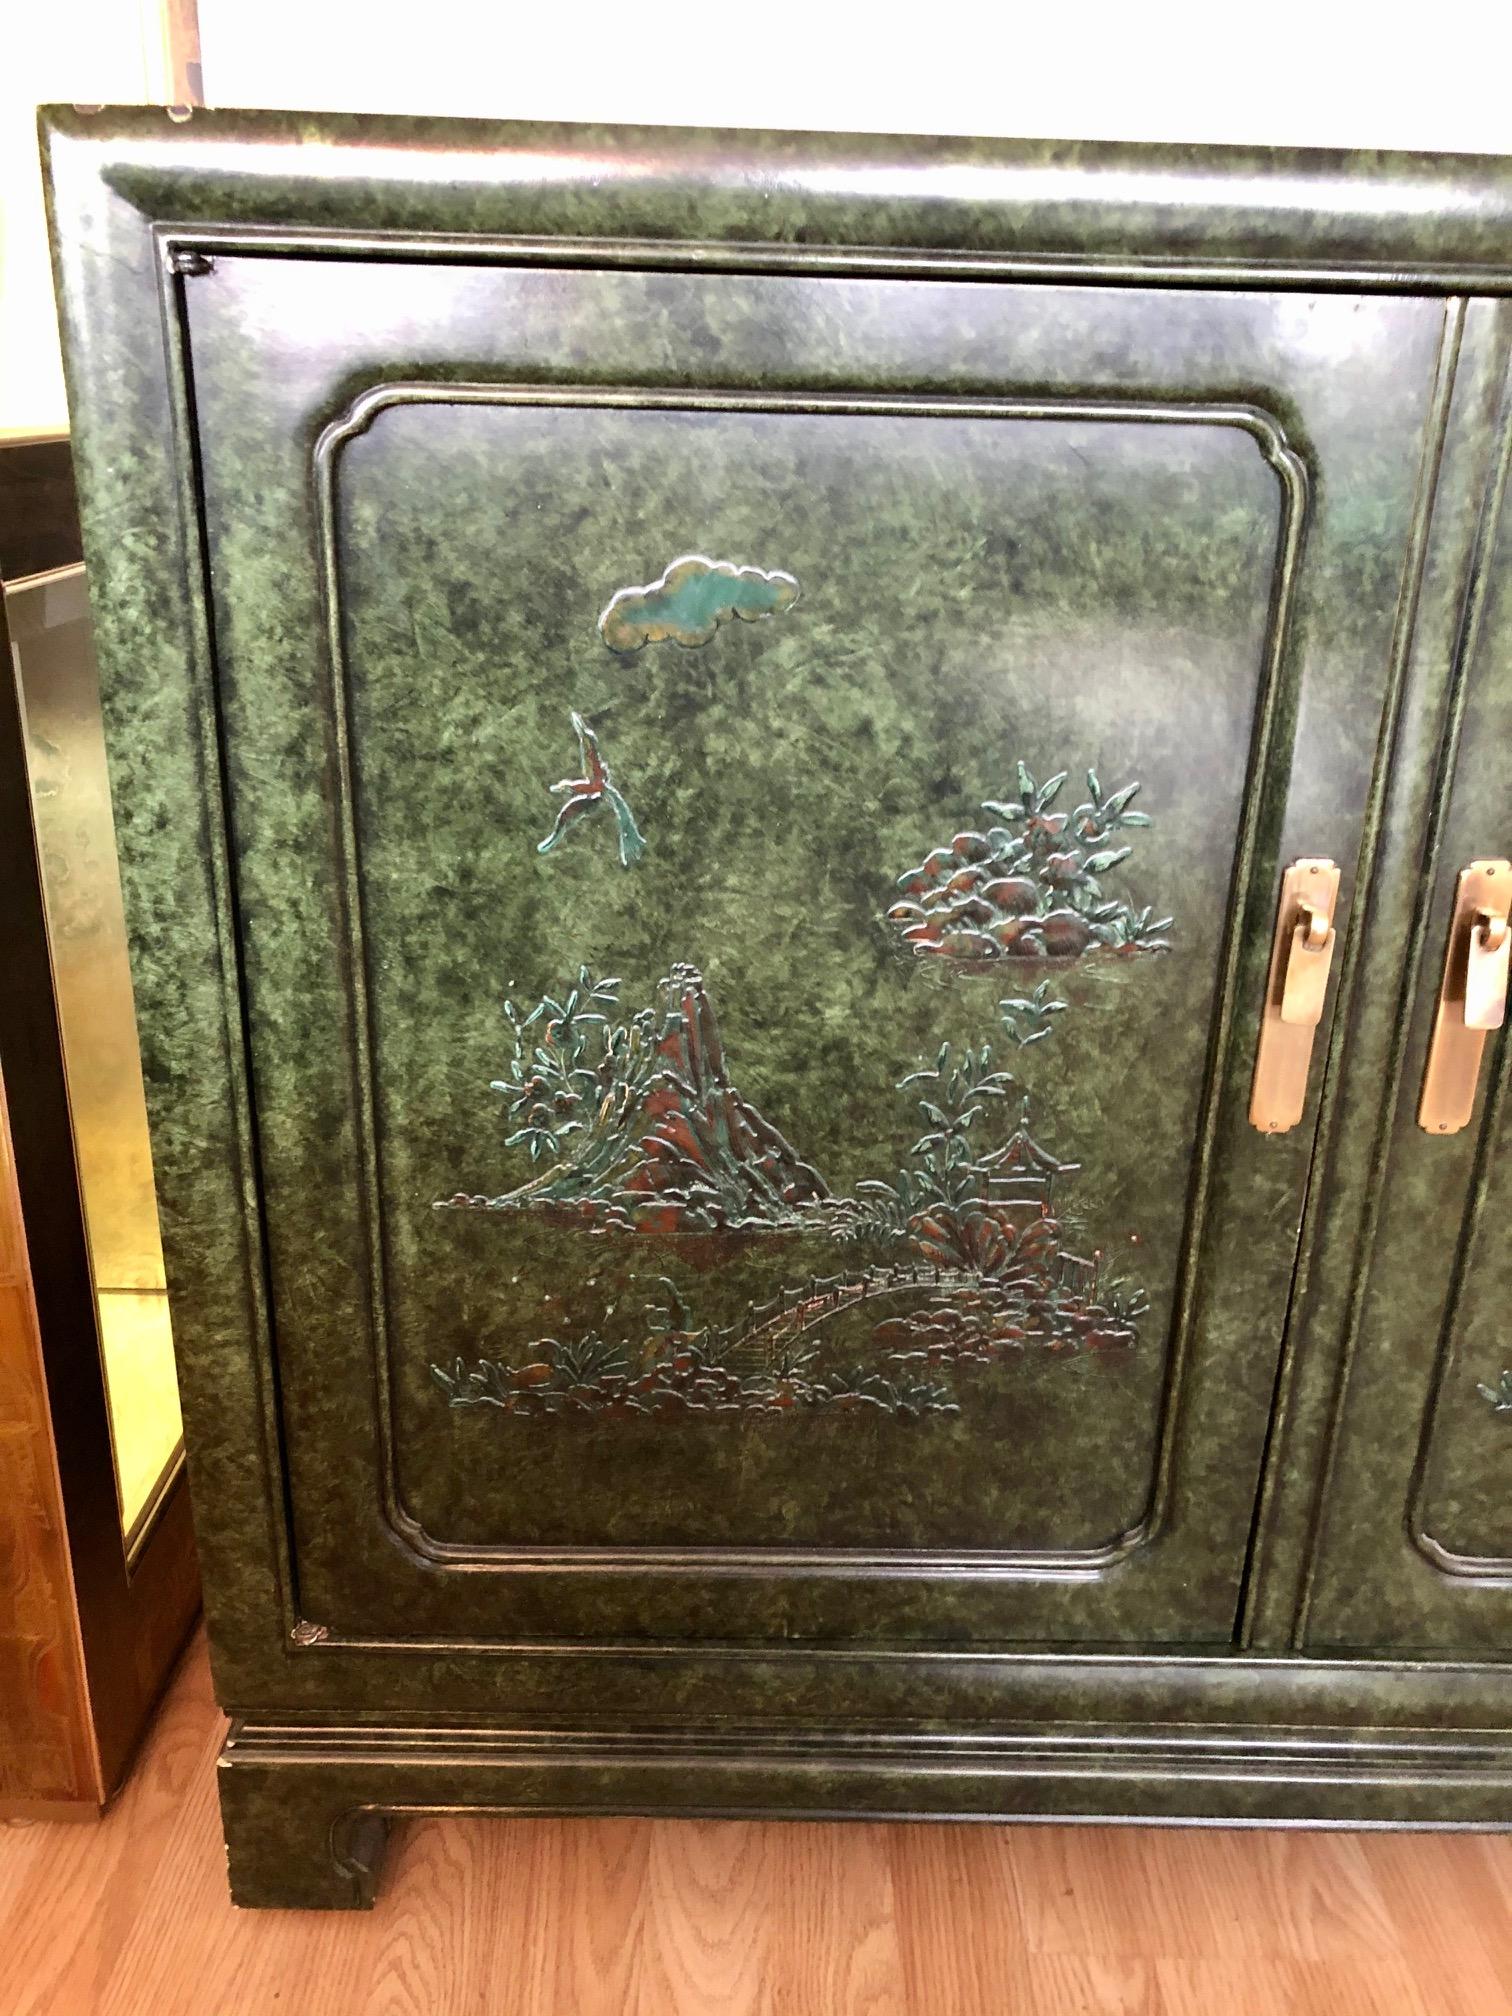 This vintage chinoiserie credenza is in overall good condition. Designed by Mario Buatta for Widdicomb. Brass hardware. Chinoiserie design on cabinet doors. Interior shelves and drawers. See photos,
circa 1970s, USA.
Dimensions:
19